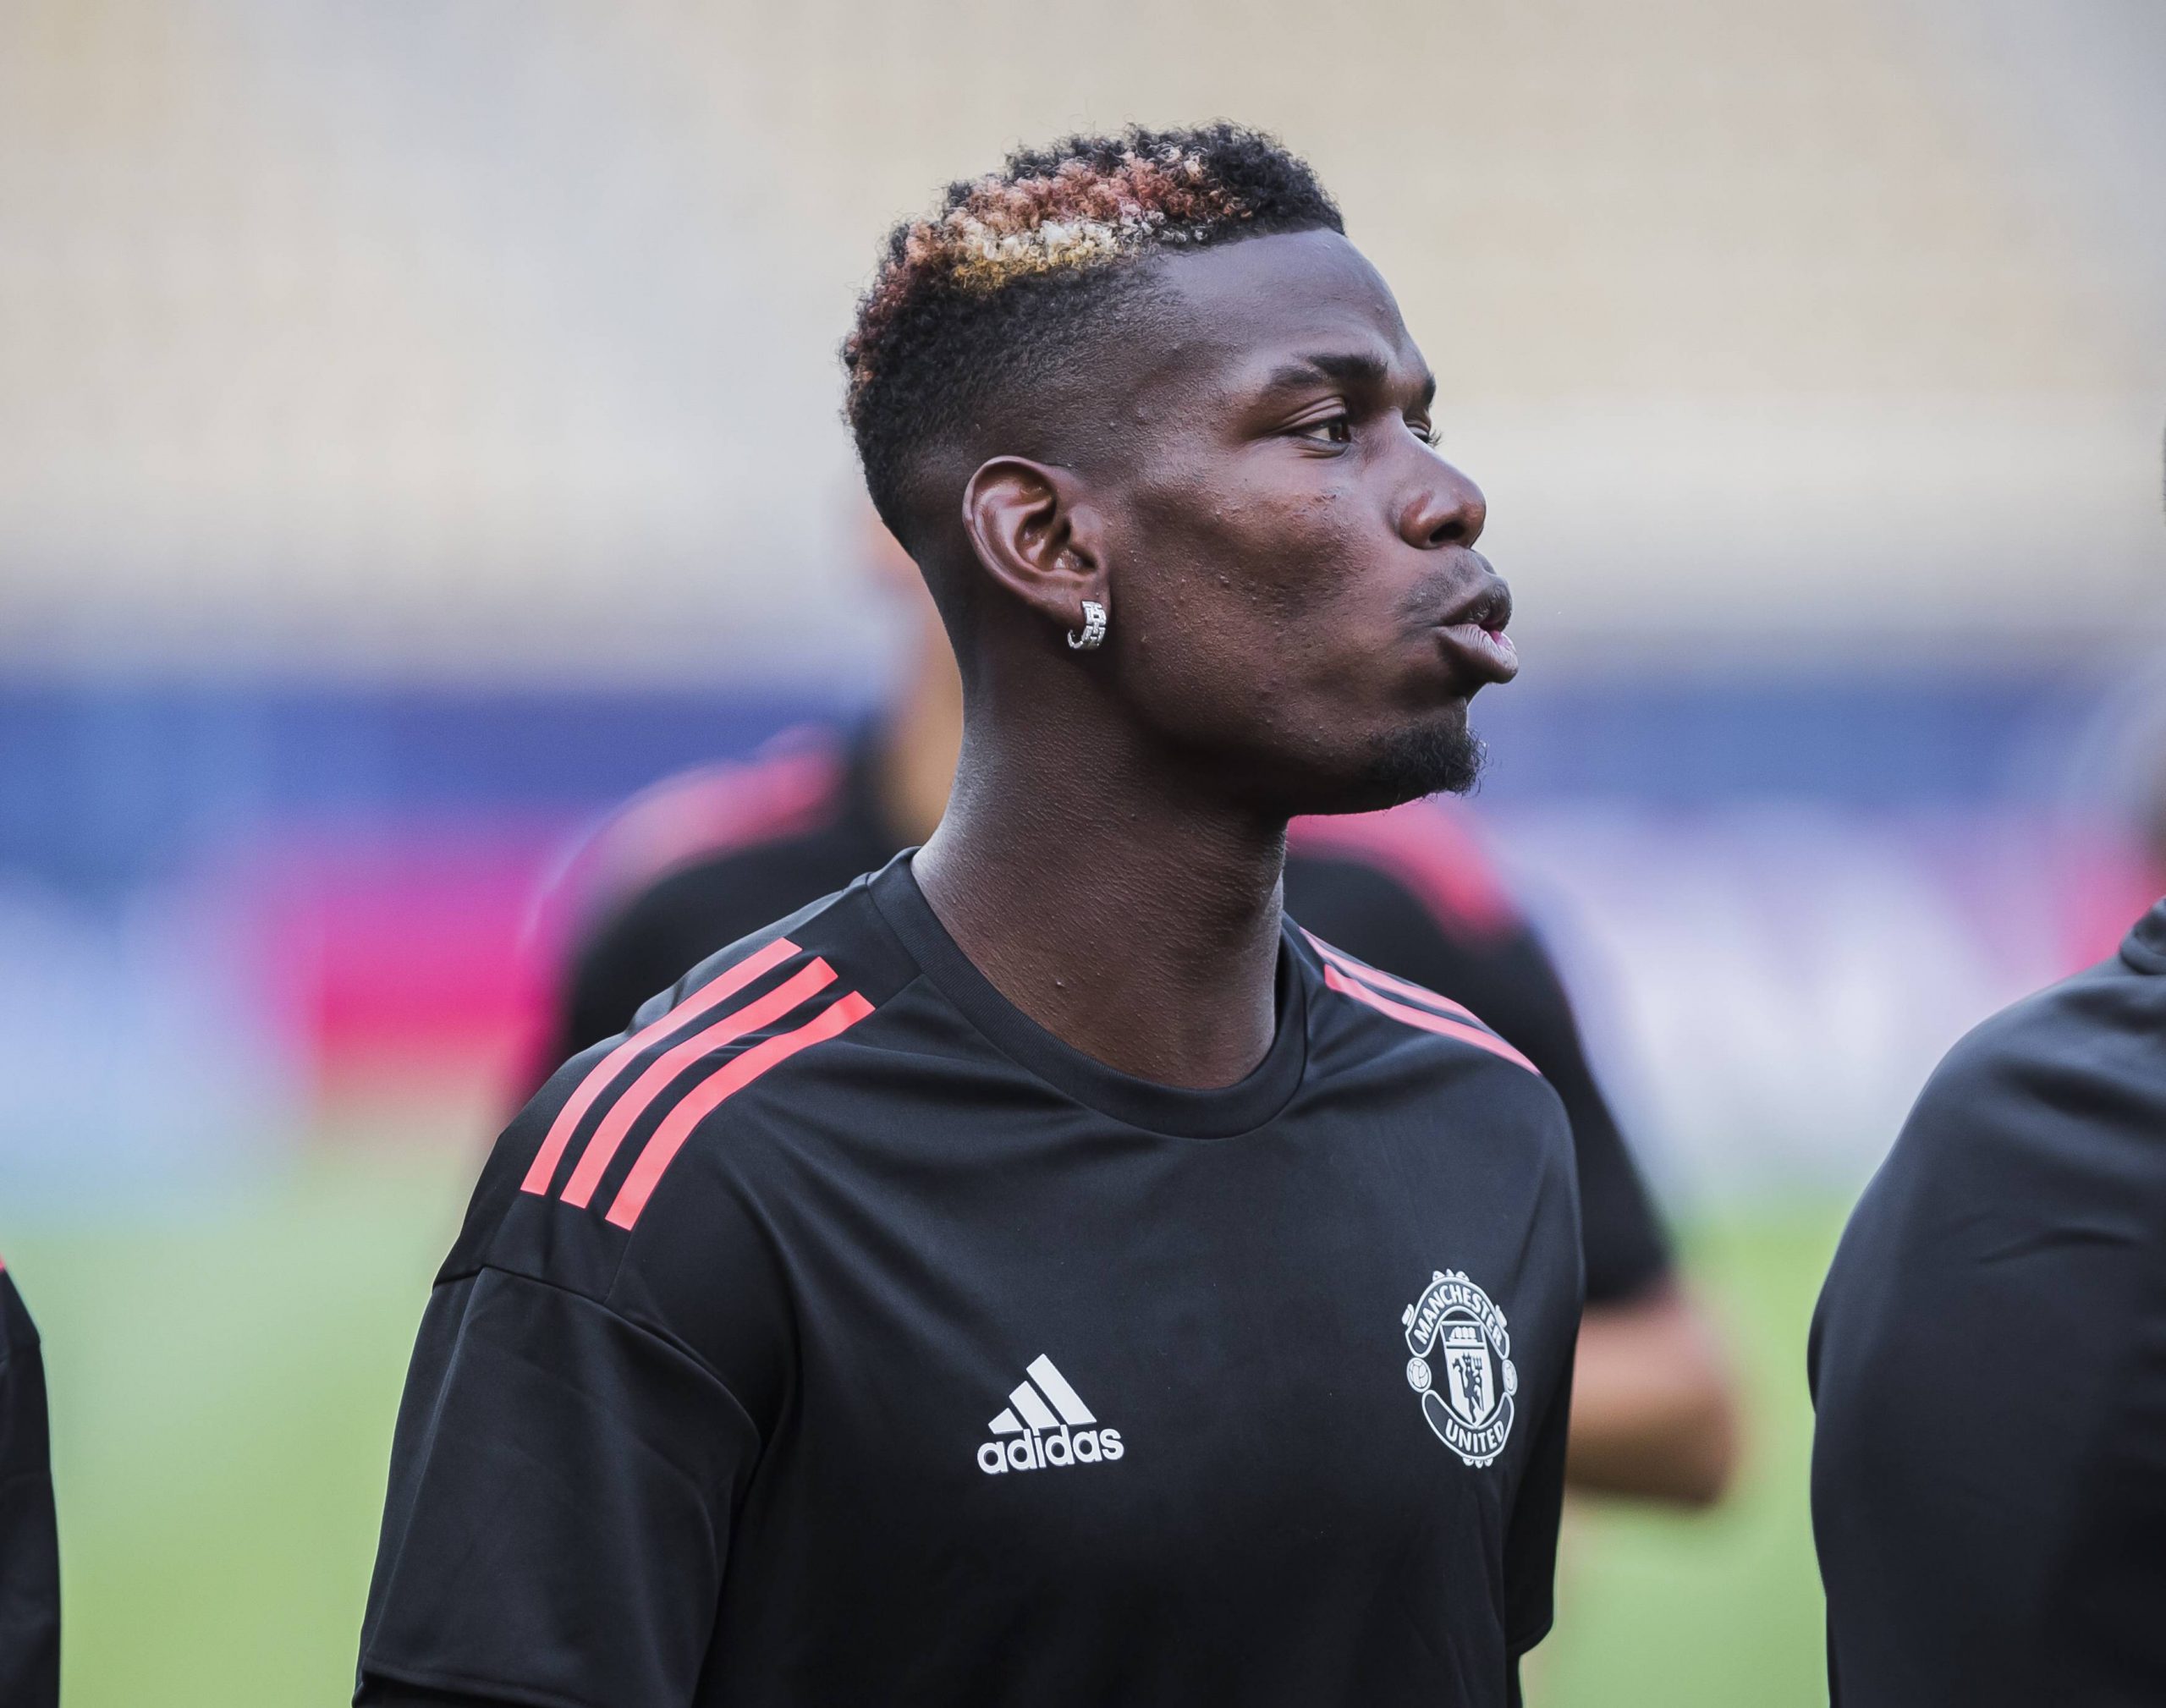 Manchester United star Paul Pogba to seal Juventus switch?